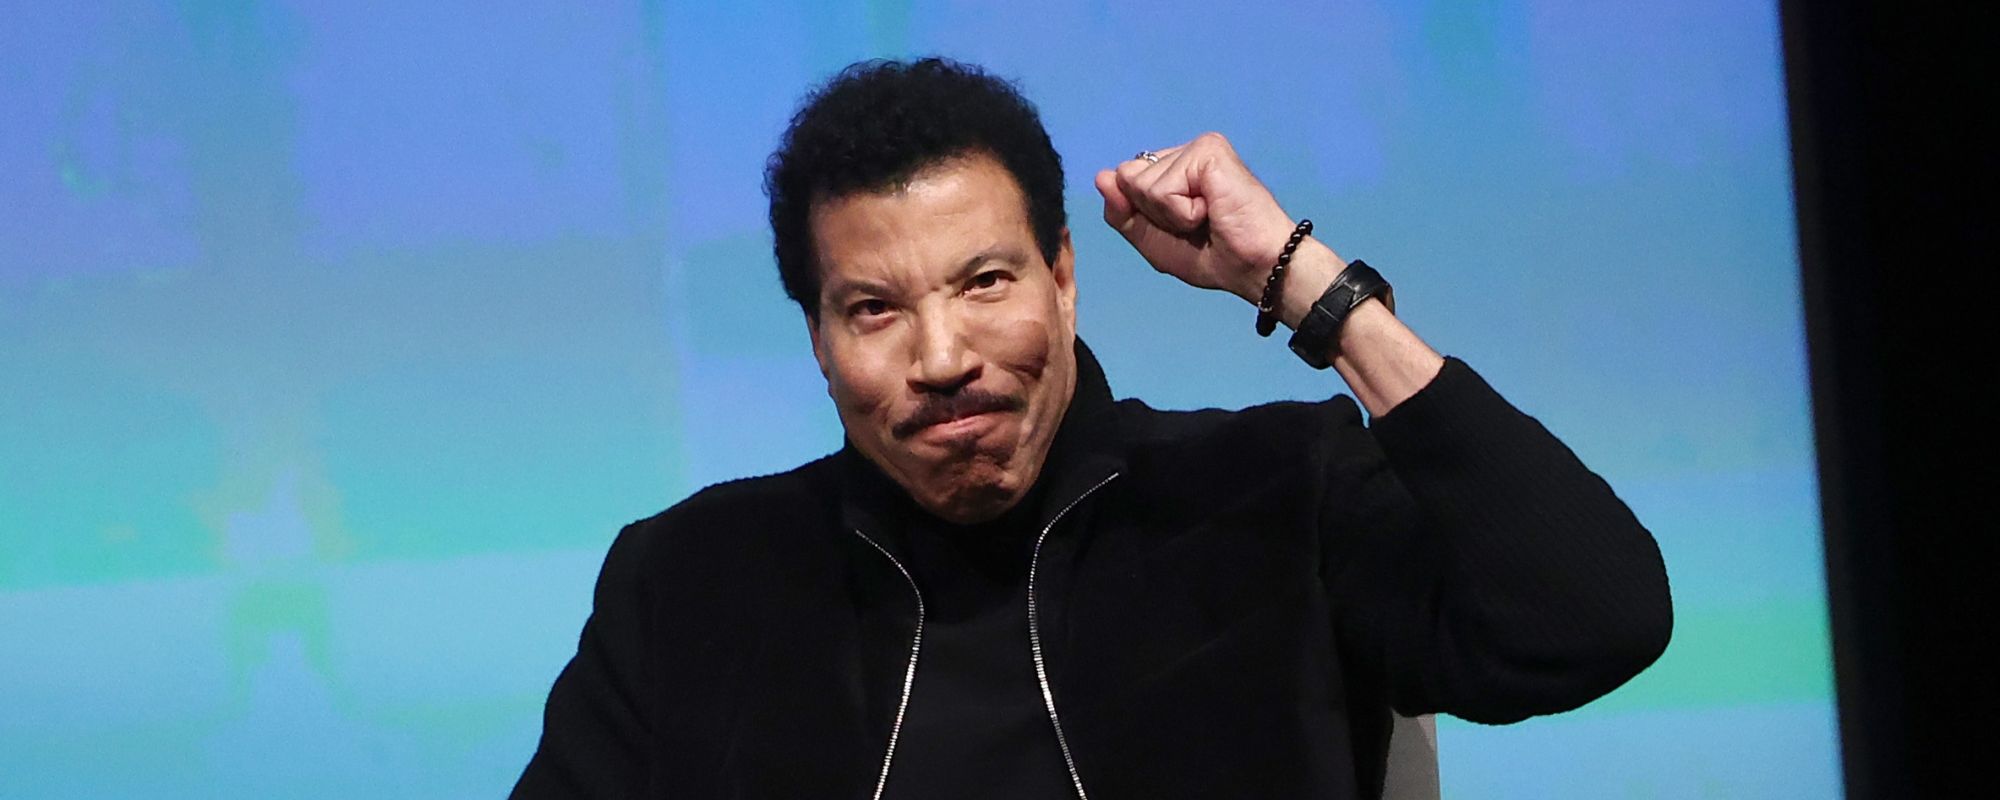 Lionel Richie Presented With Leather Aviator Jacket In ‘American Idol’ Hometown Visit